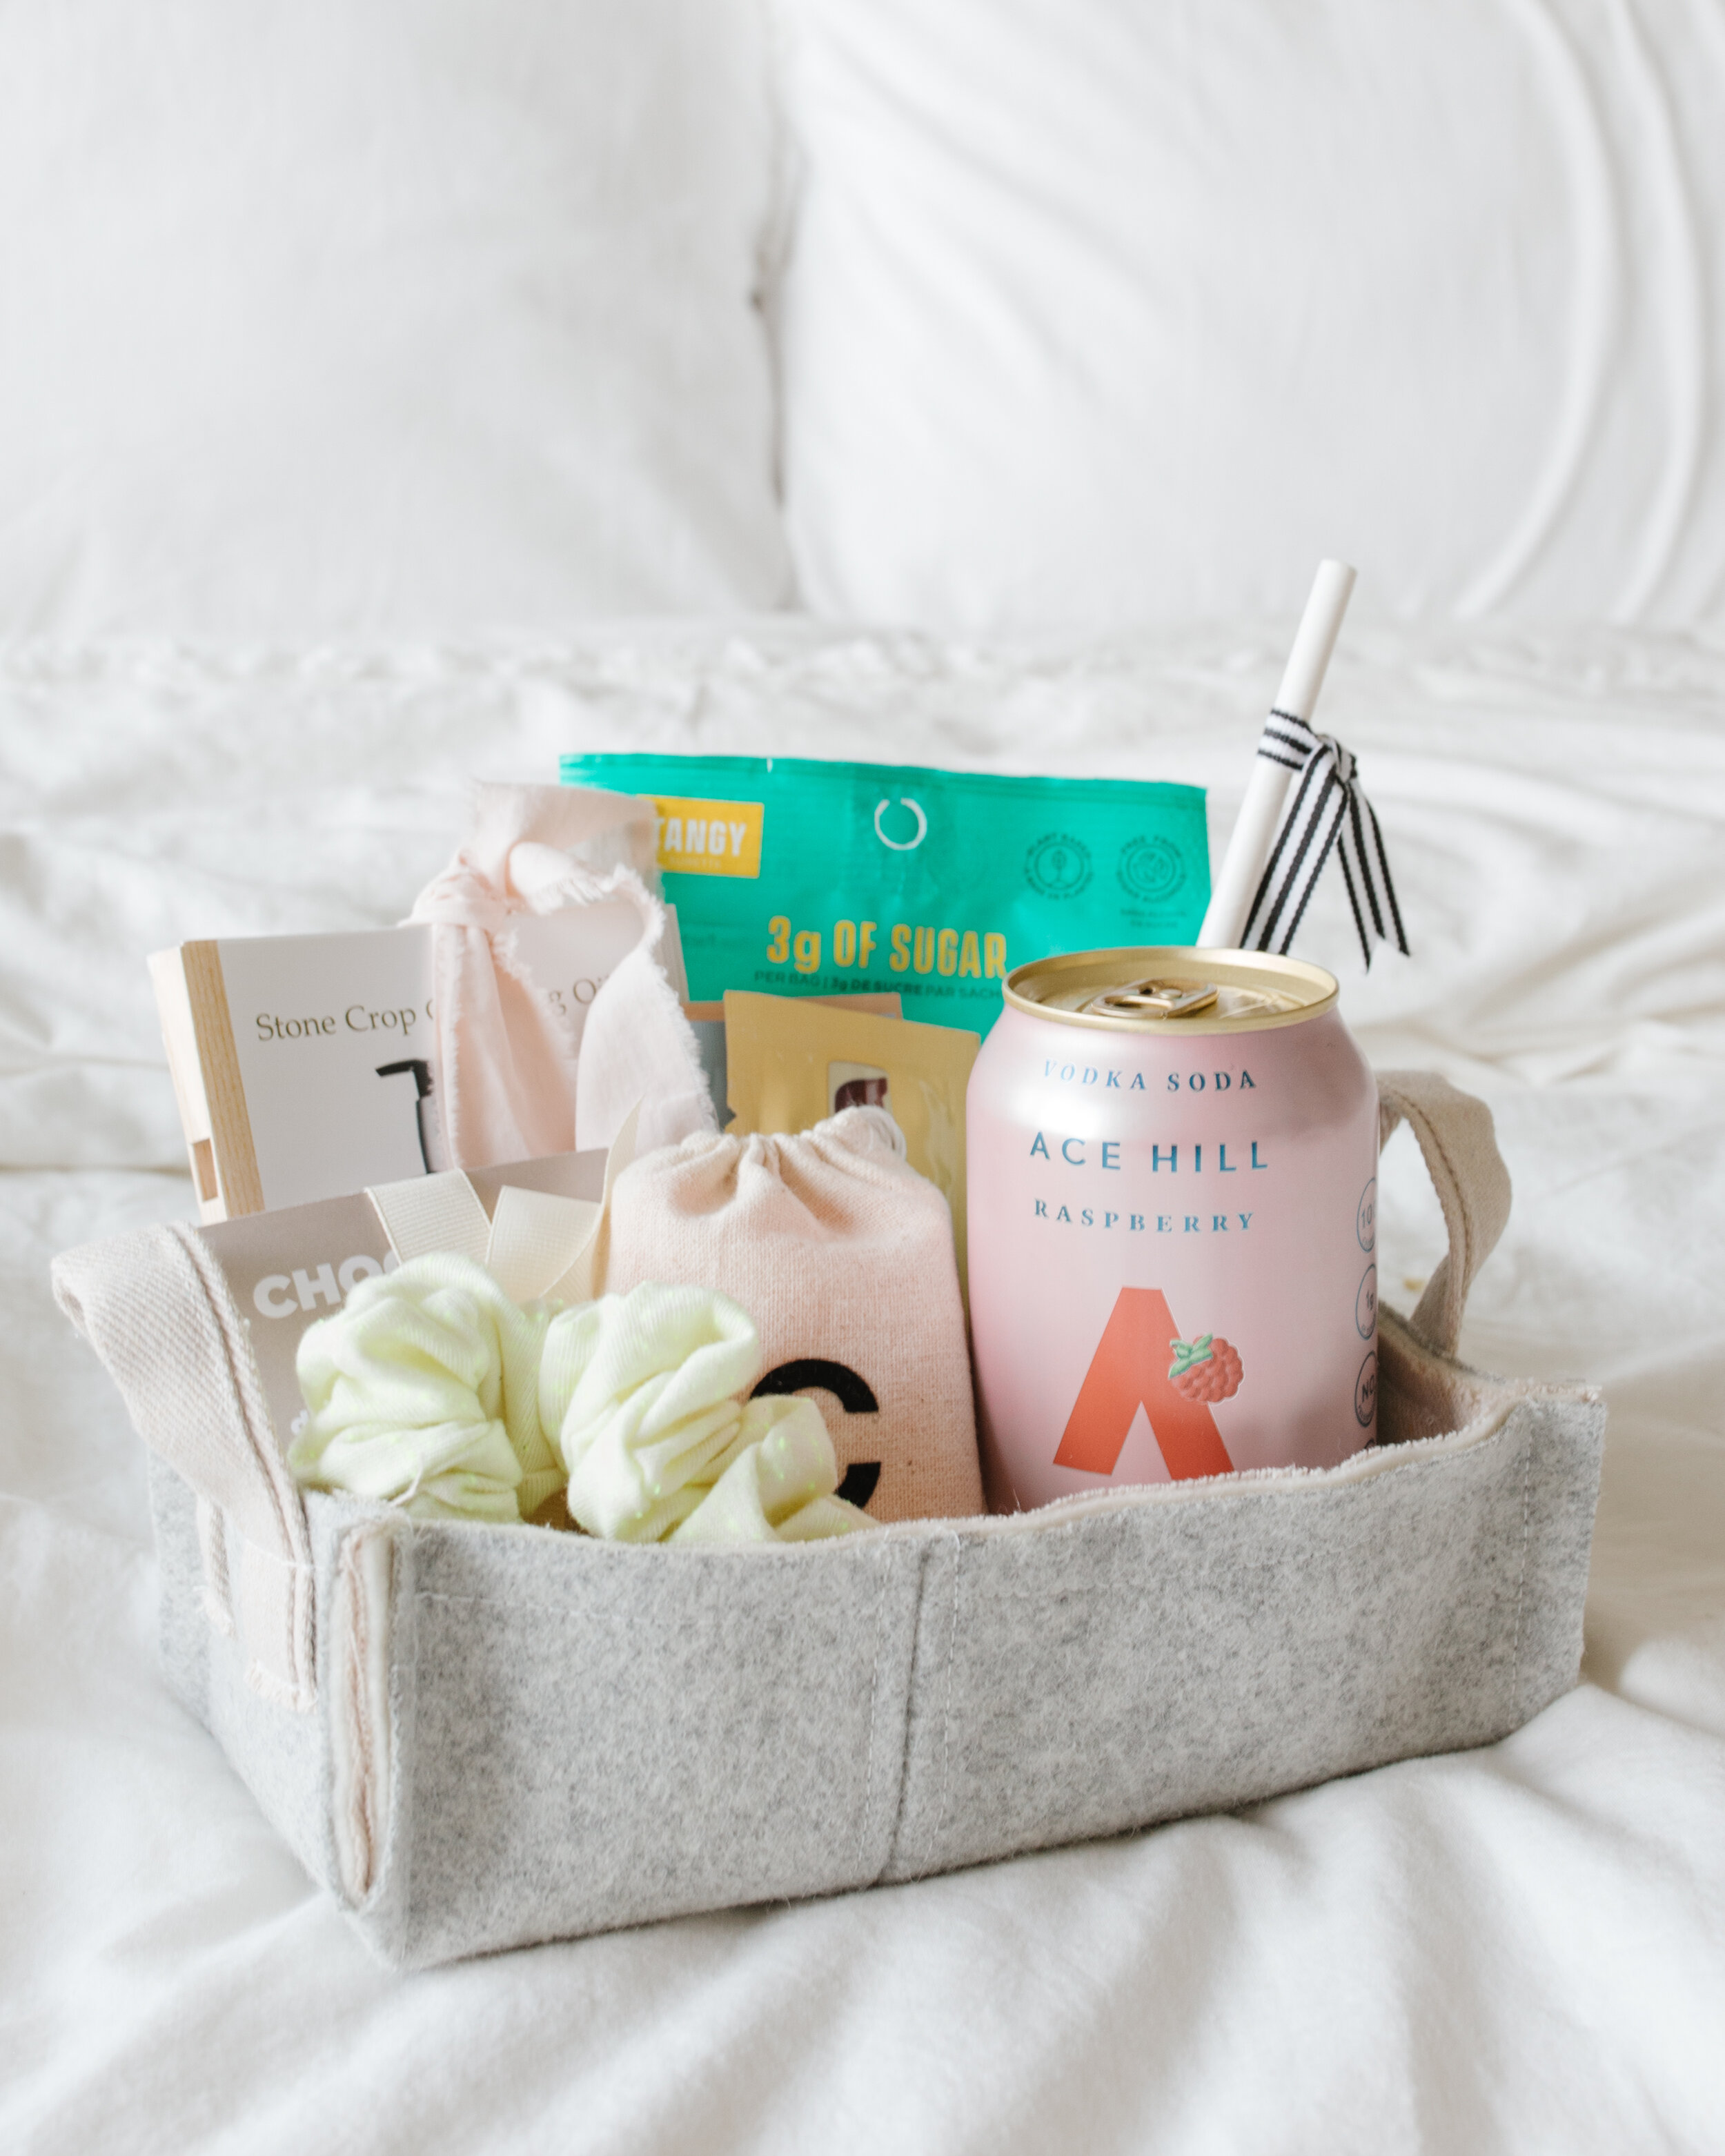 Hostess Gift Basket in a Paint Can - Pretty Handy Girl